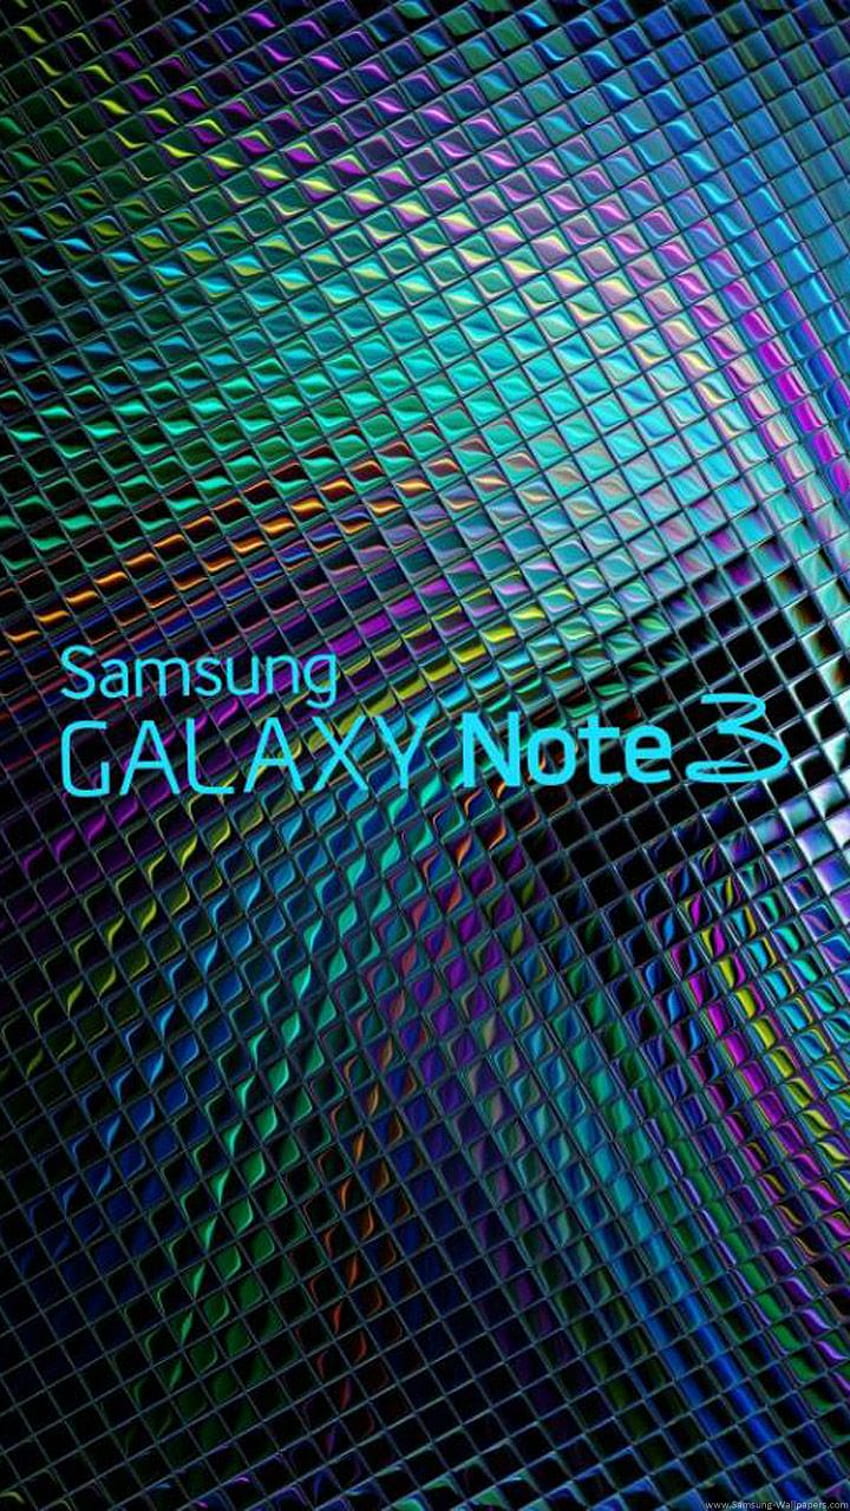 samsung note 3 wallpapers hd